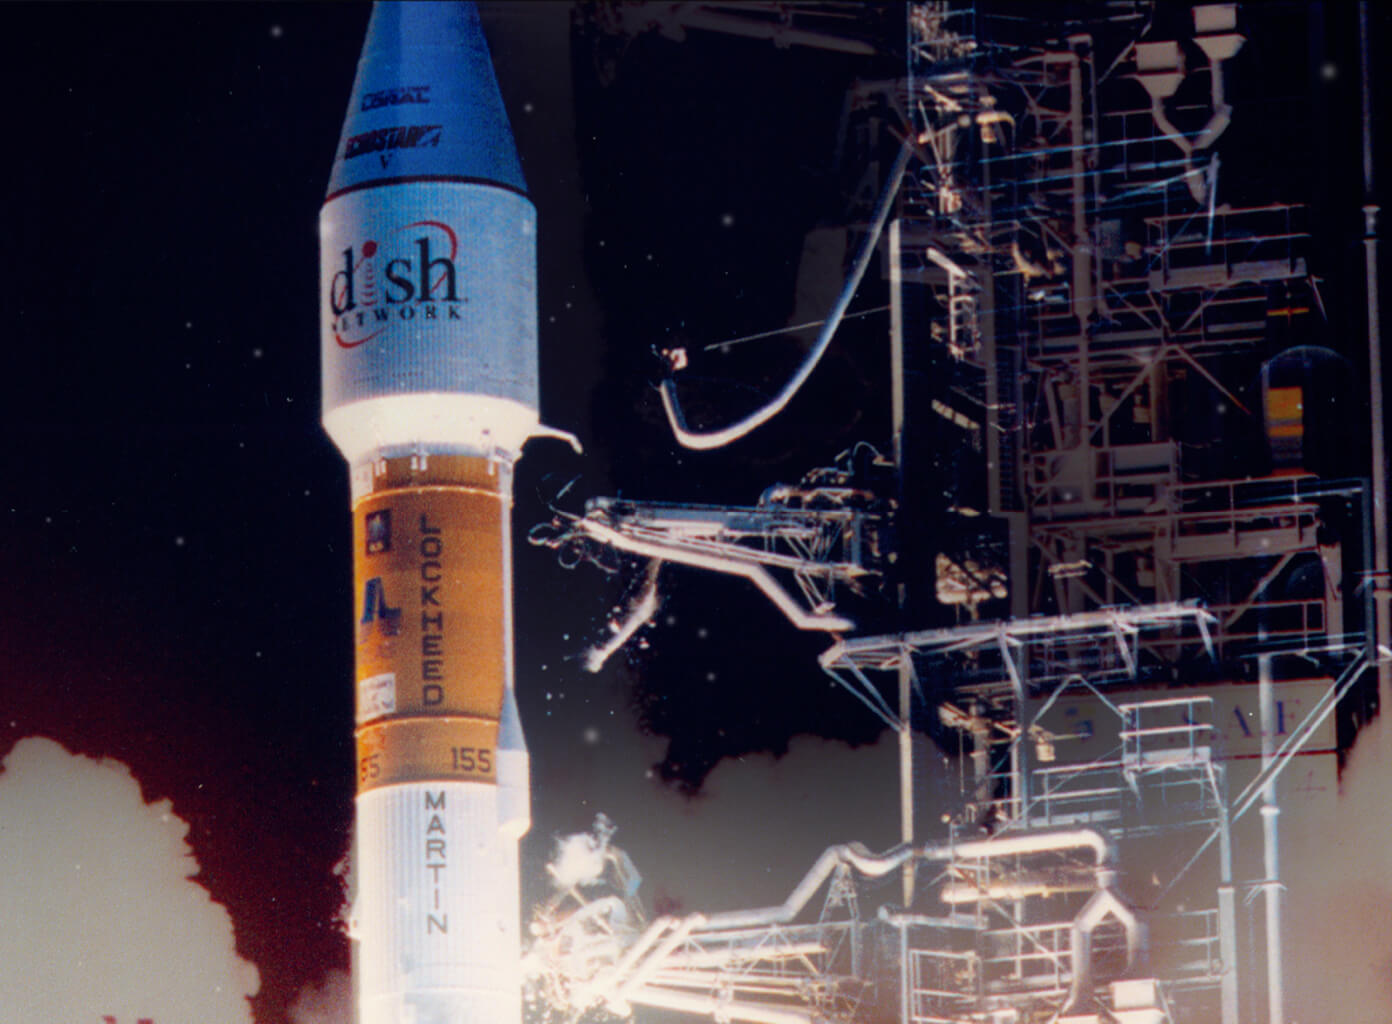 DISH Network making history launching satellite into space at cool tech job